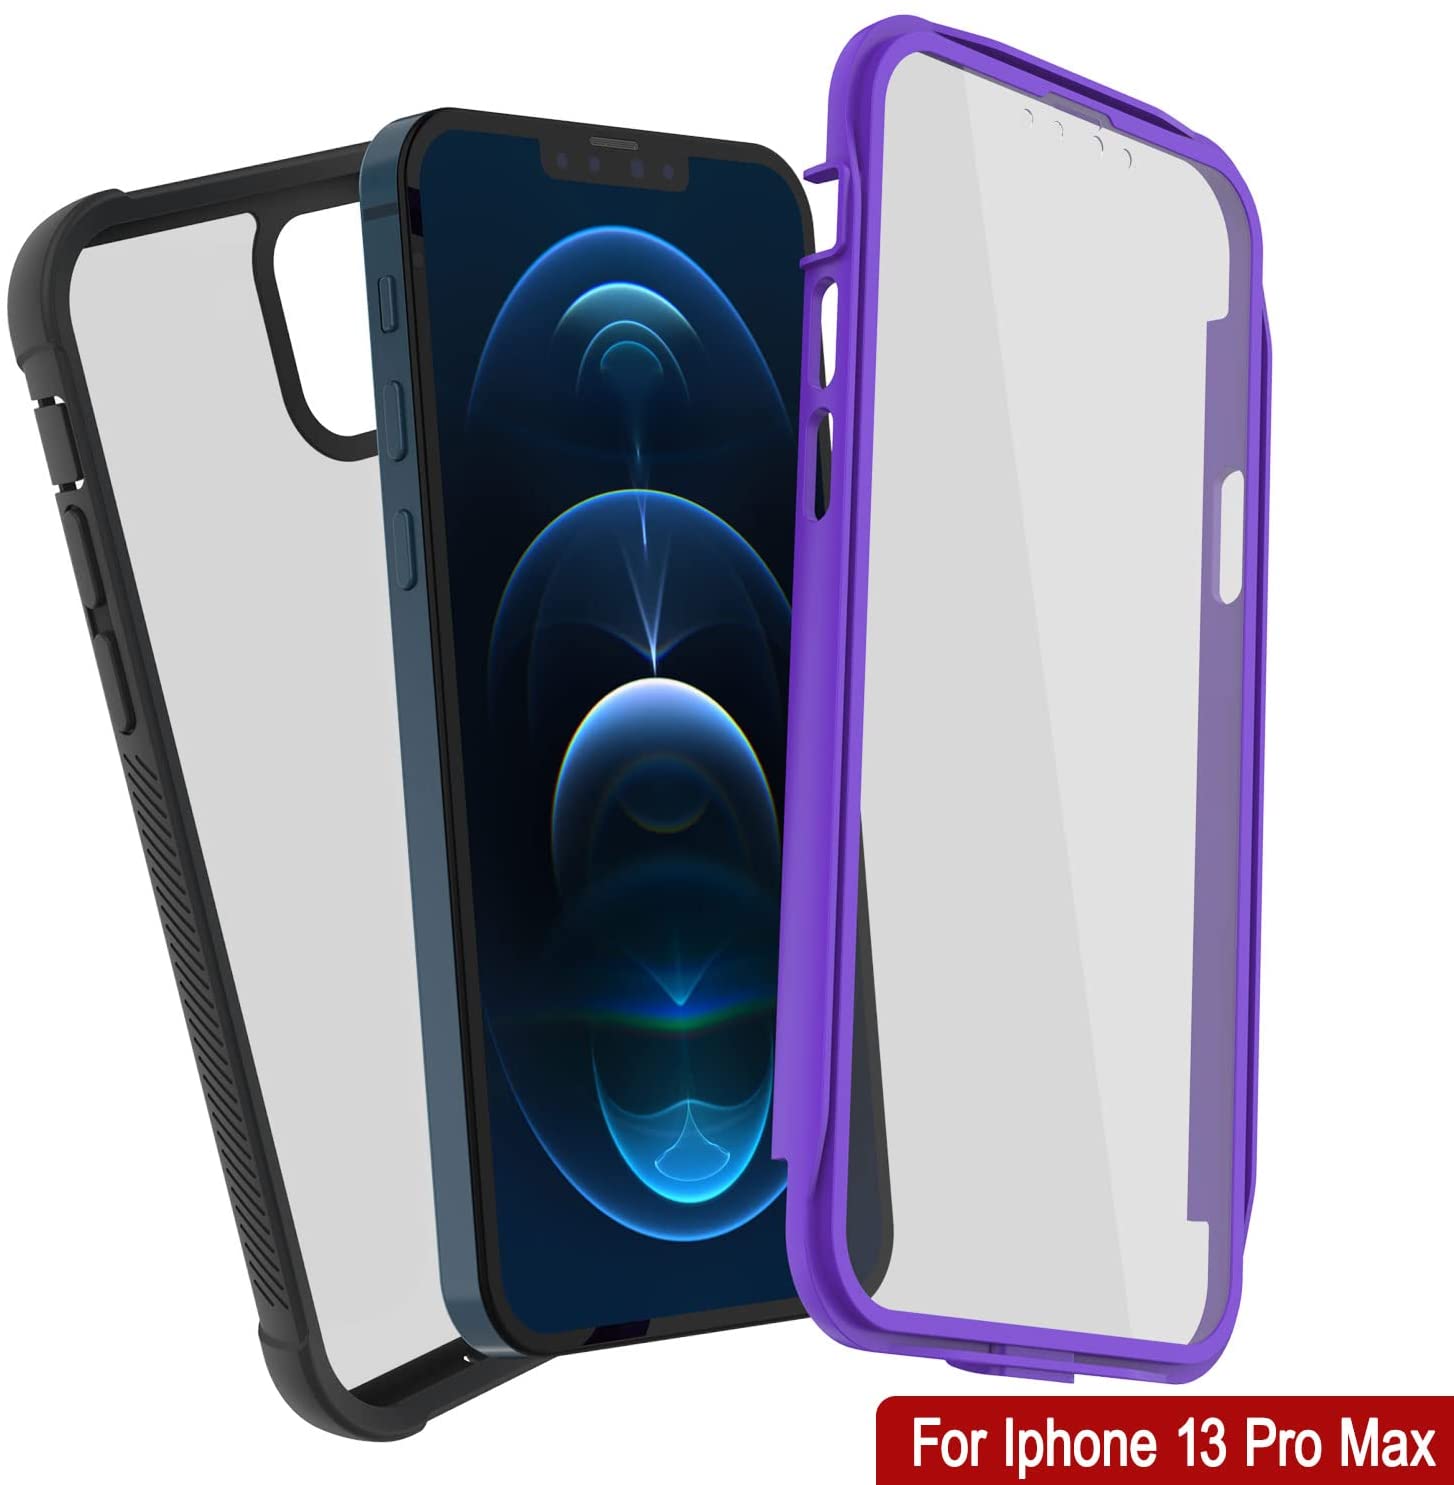 iPhone 13 Pro Max Case (Cyber Edition)